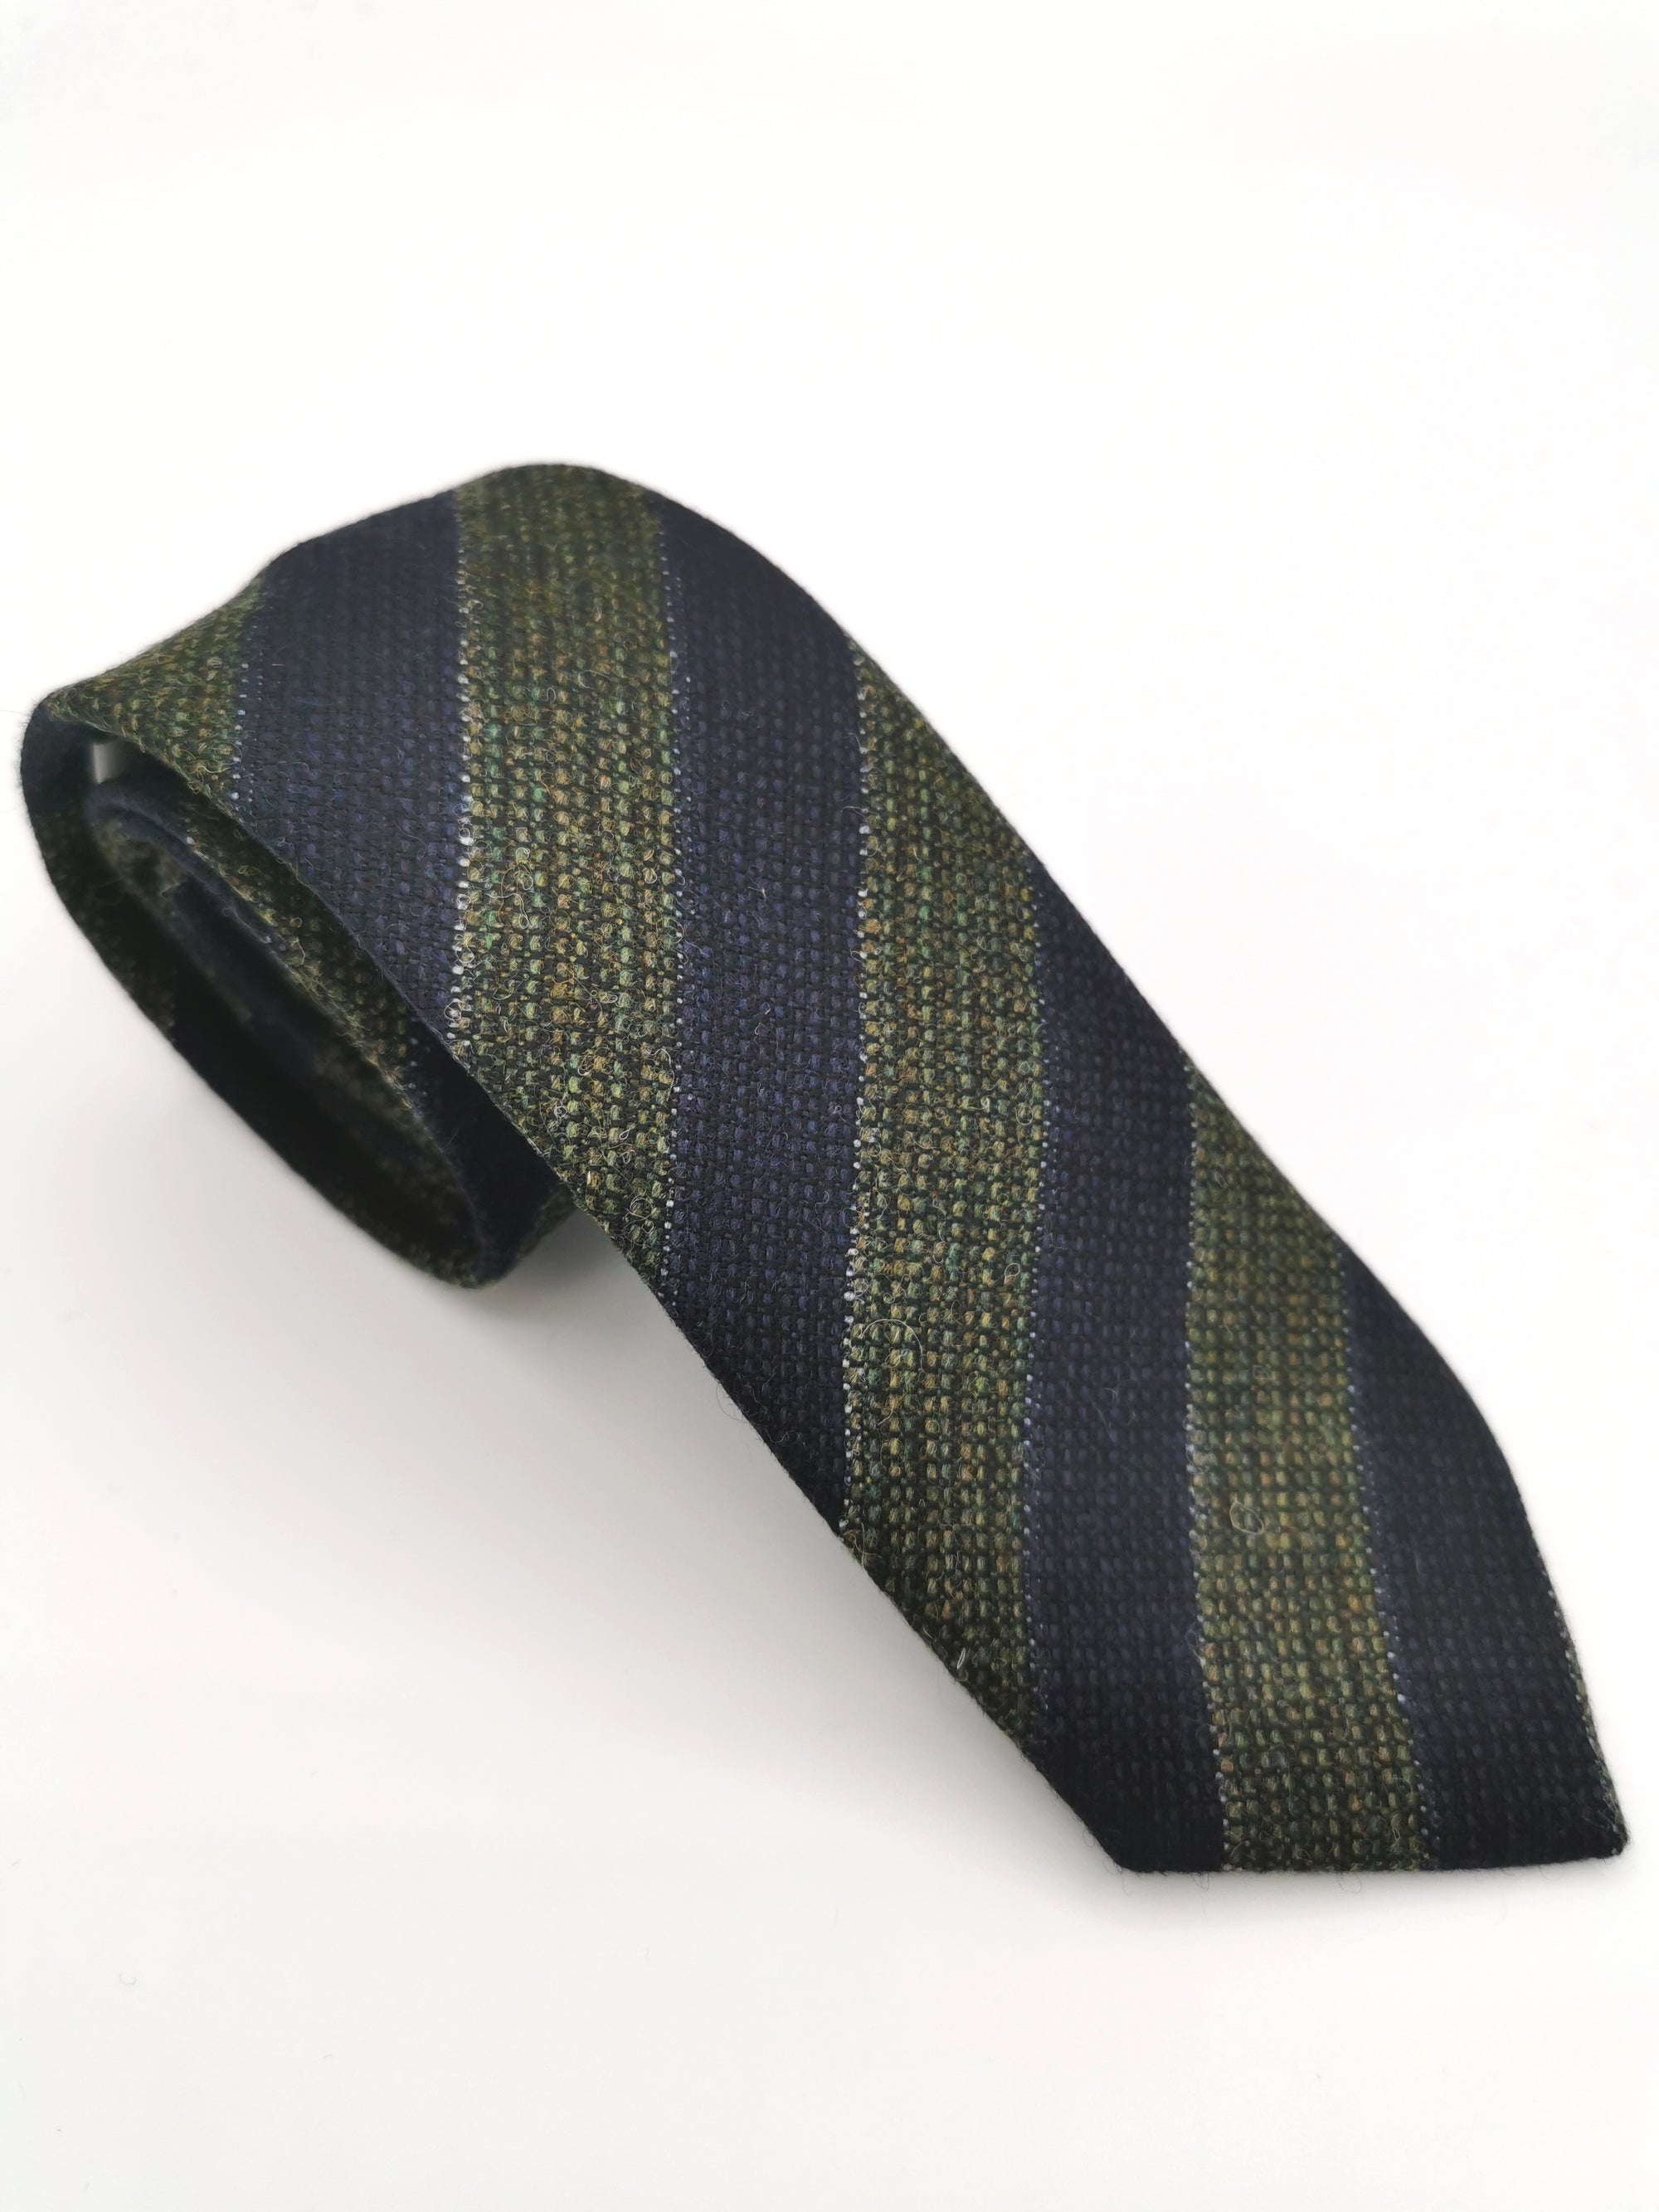 Ferala wool tie with blue and green stripes